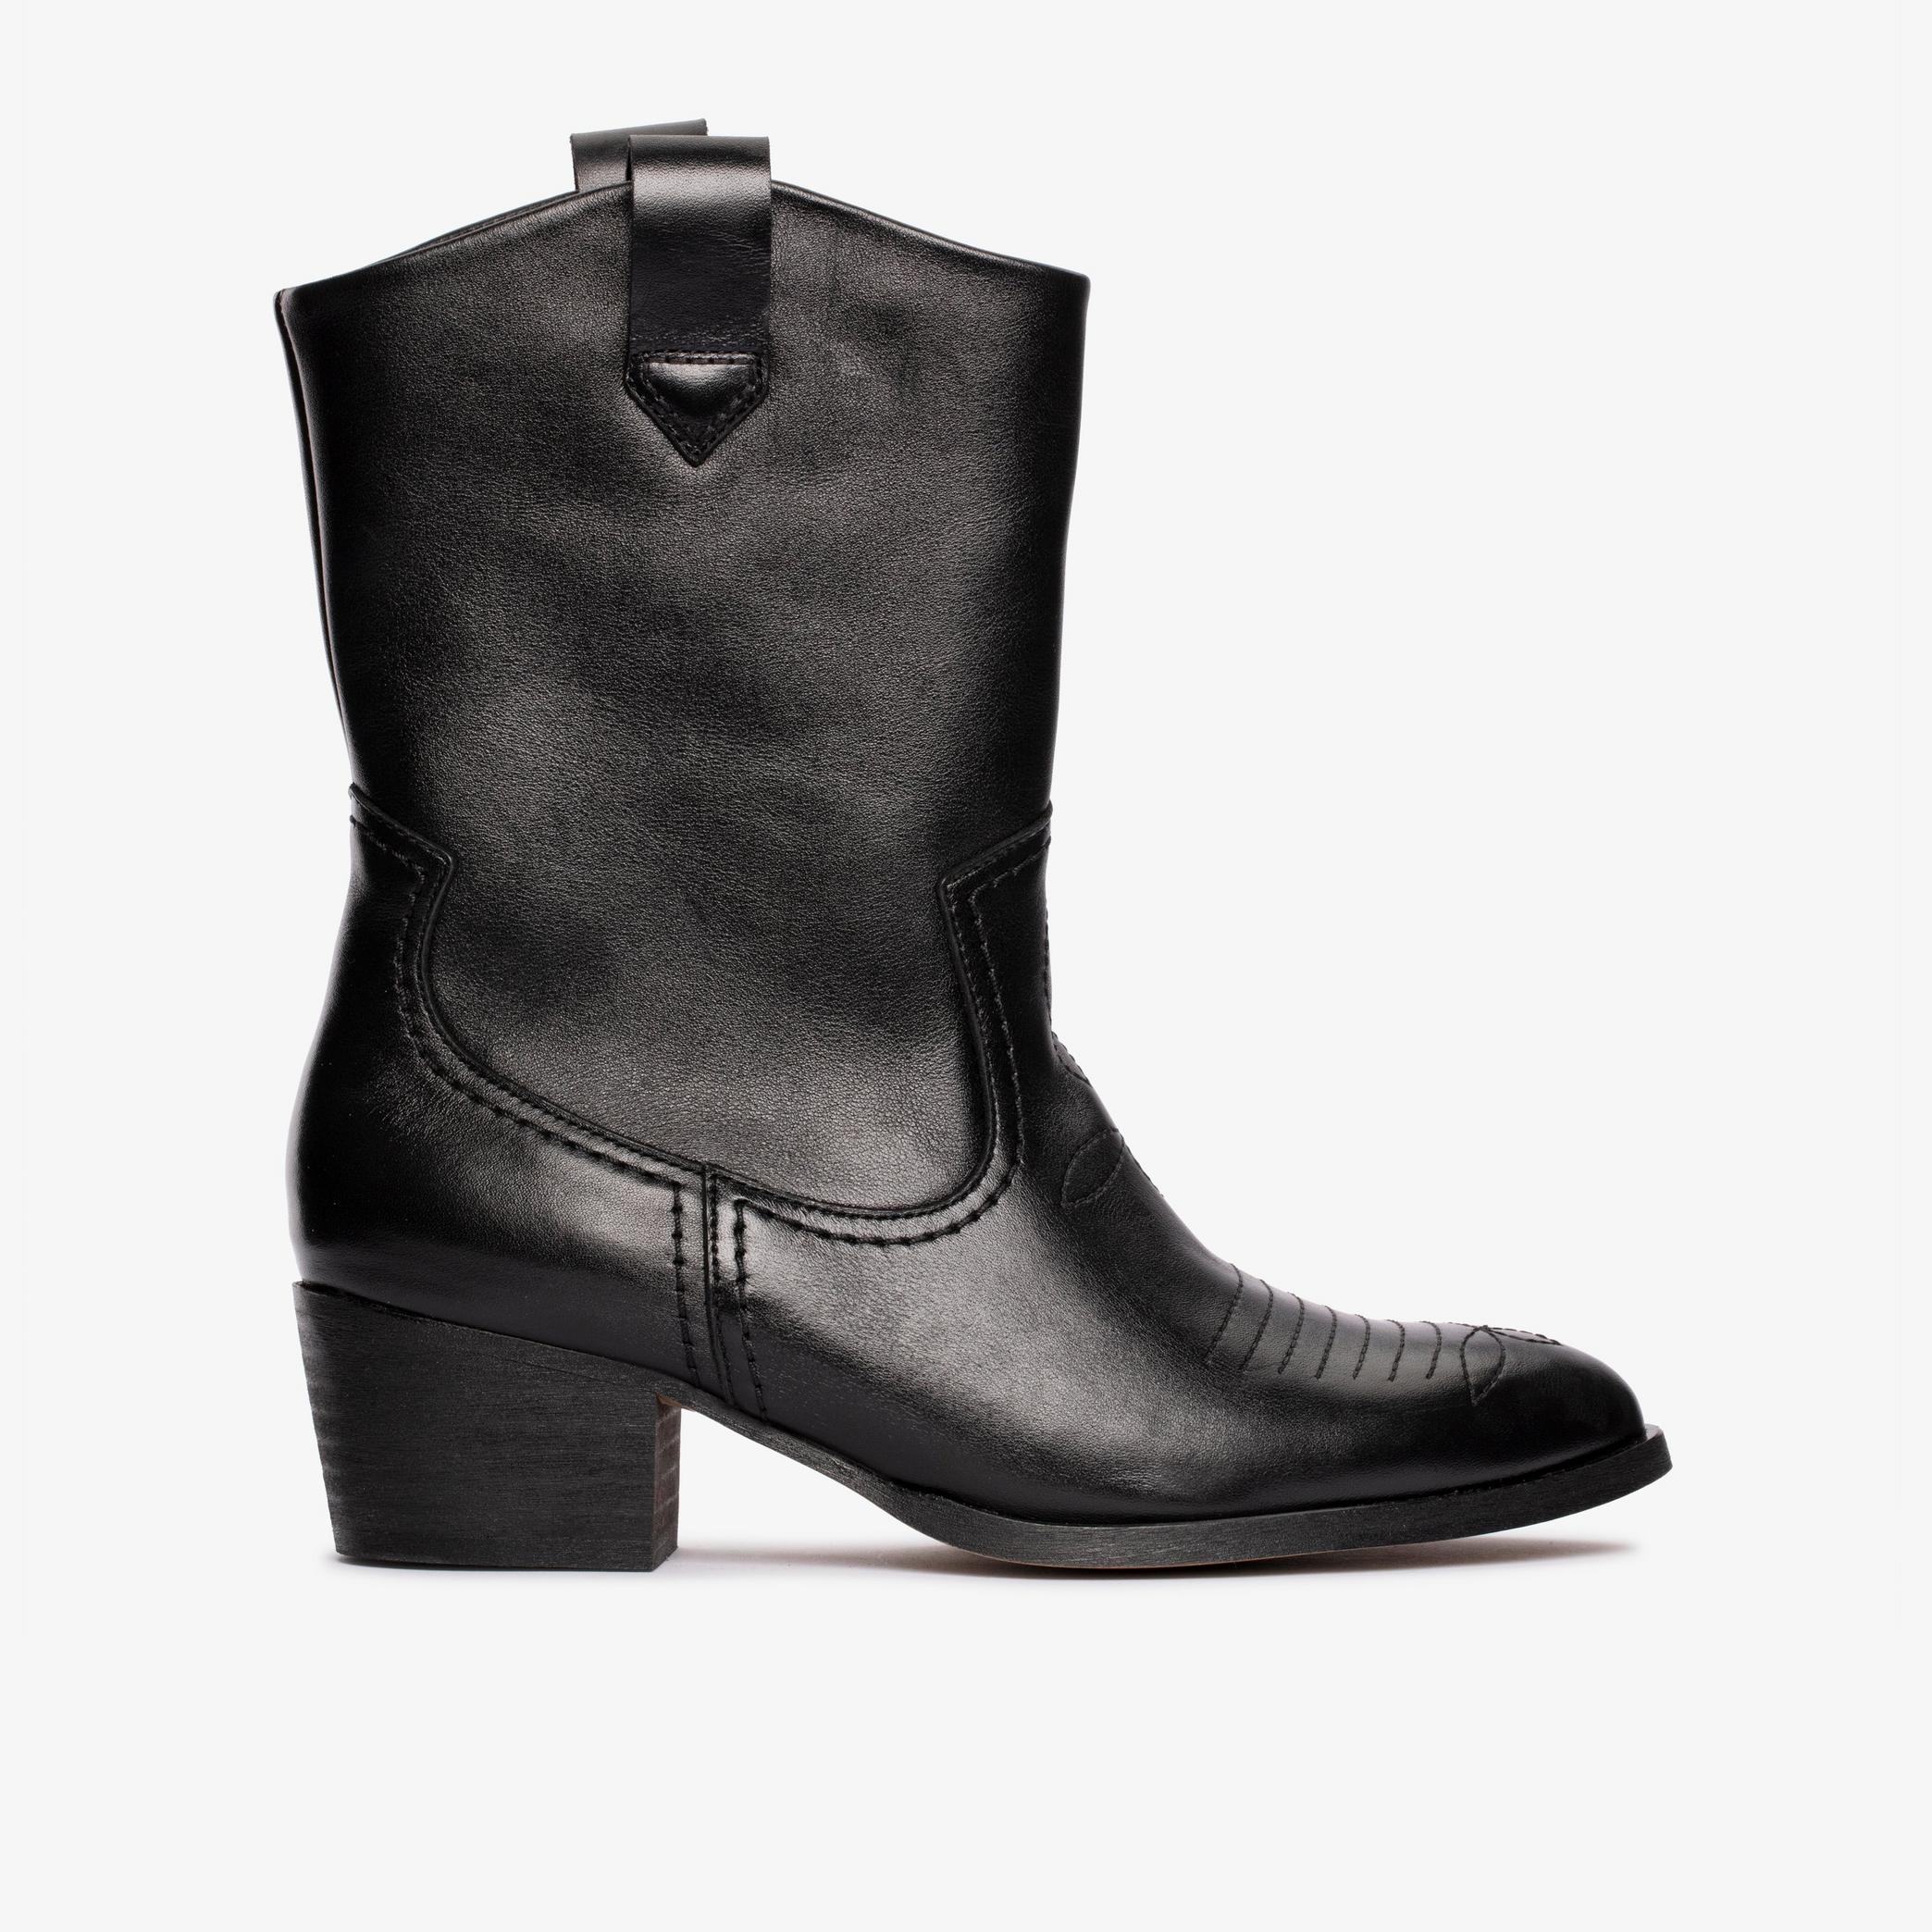 Octavia Up Black Leather Mid Calf Boots, view 1 of 6